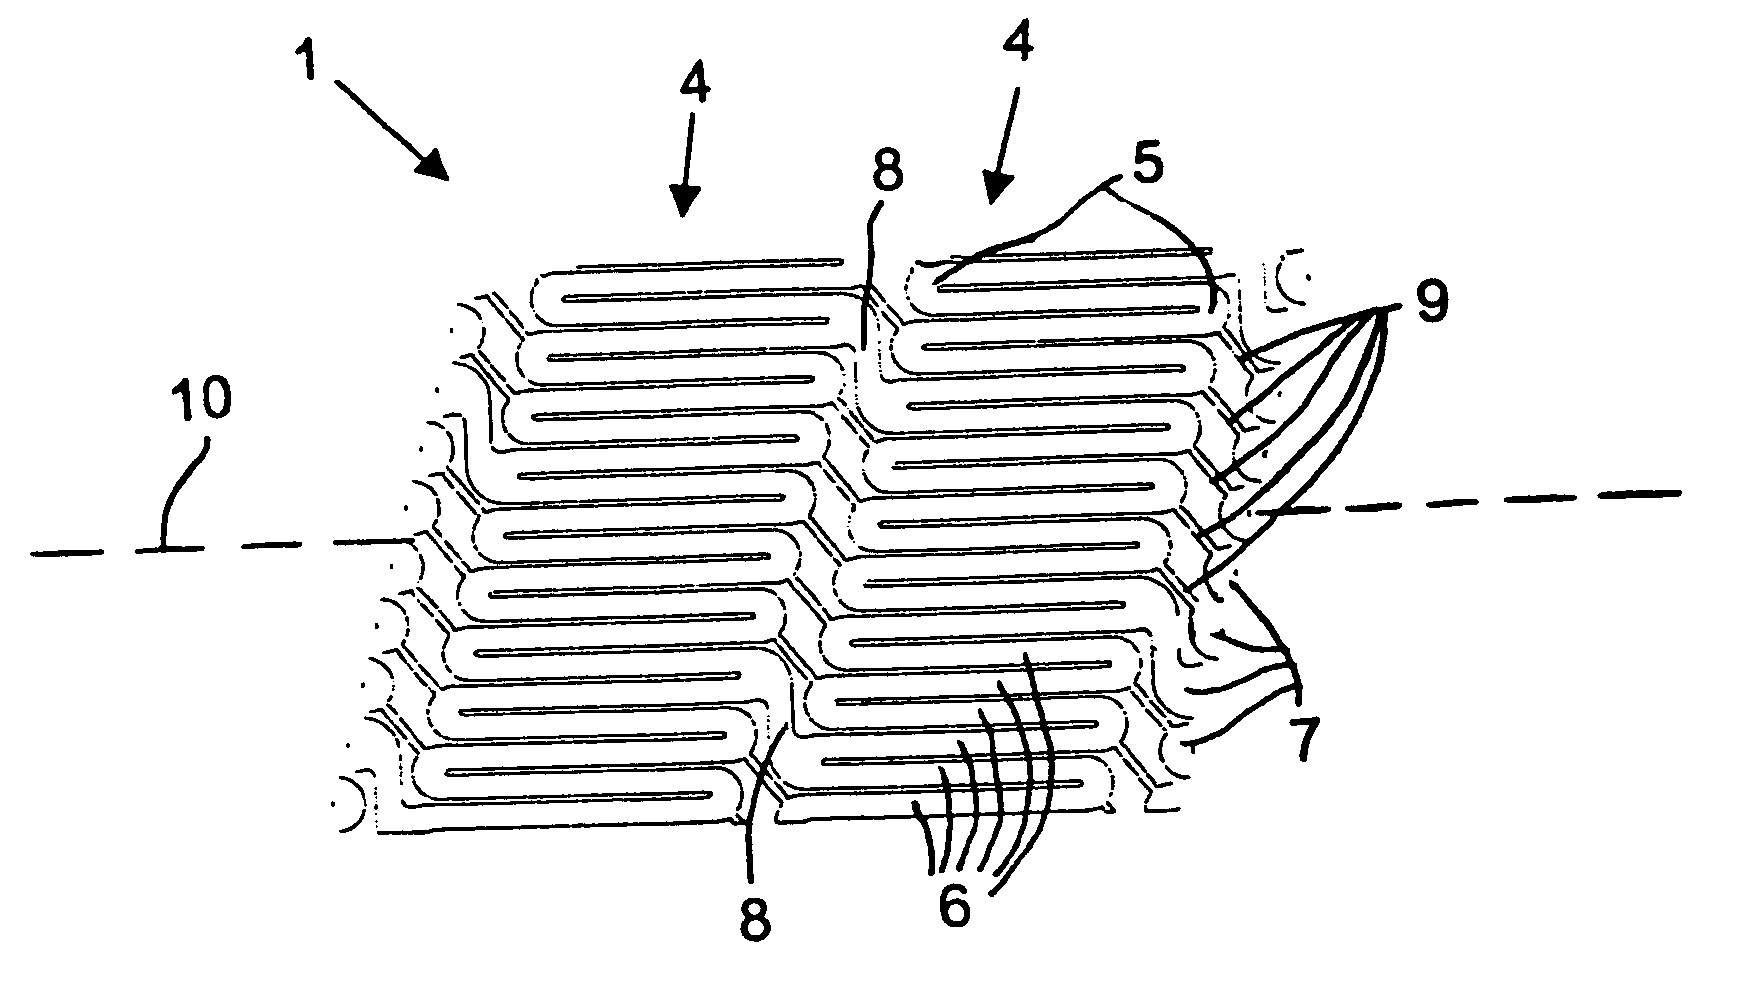 Stent and method for manufacturing the stent